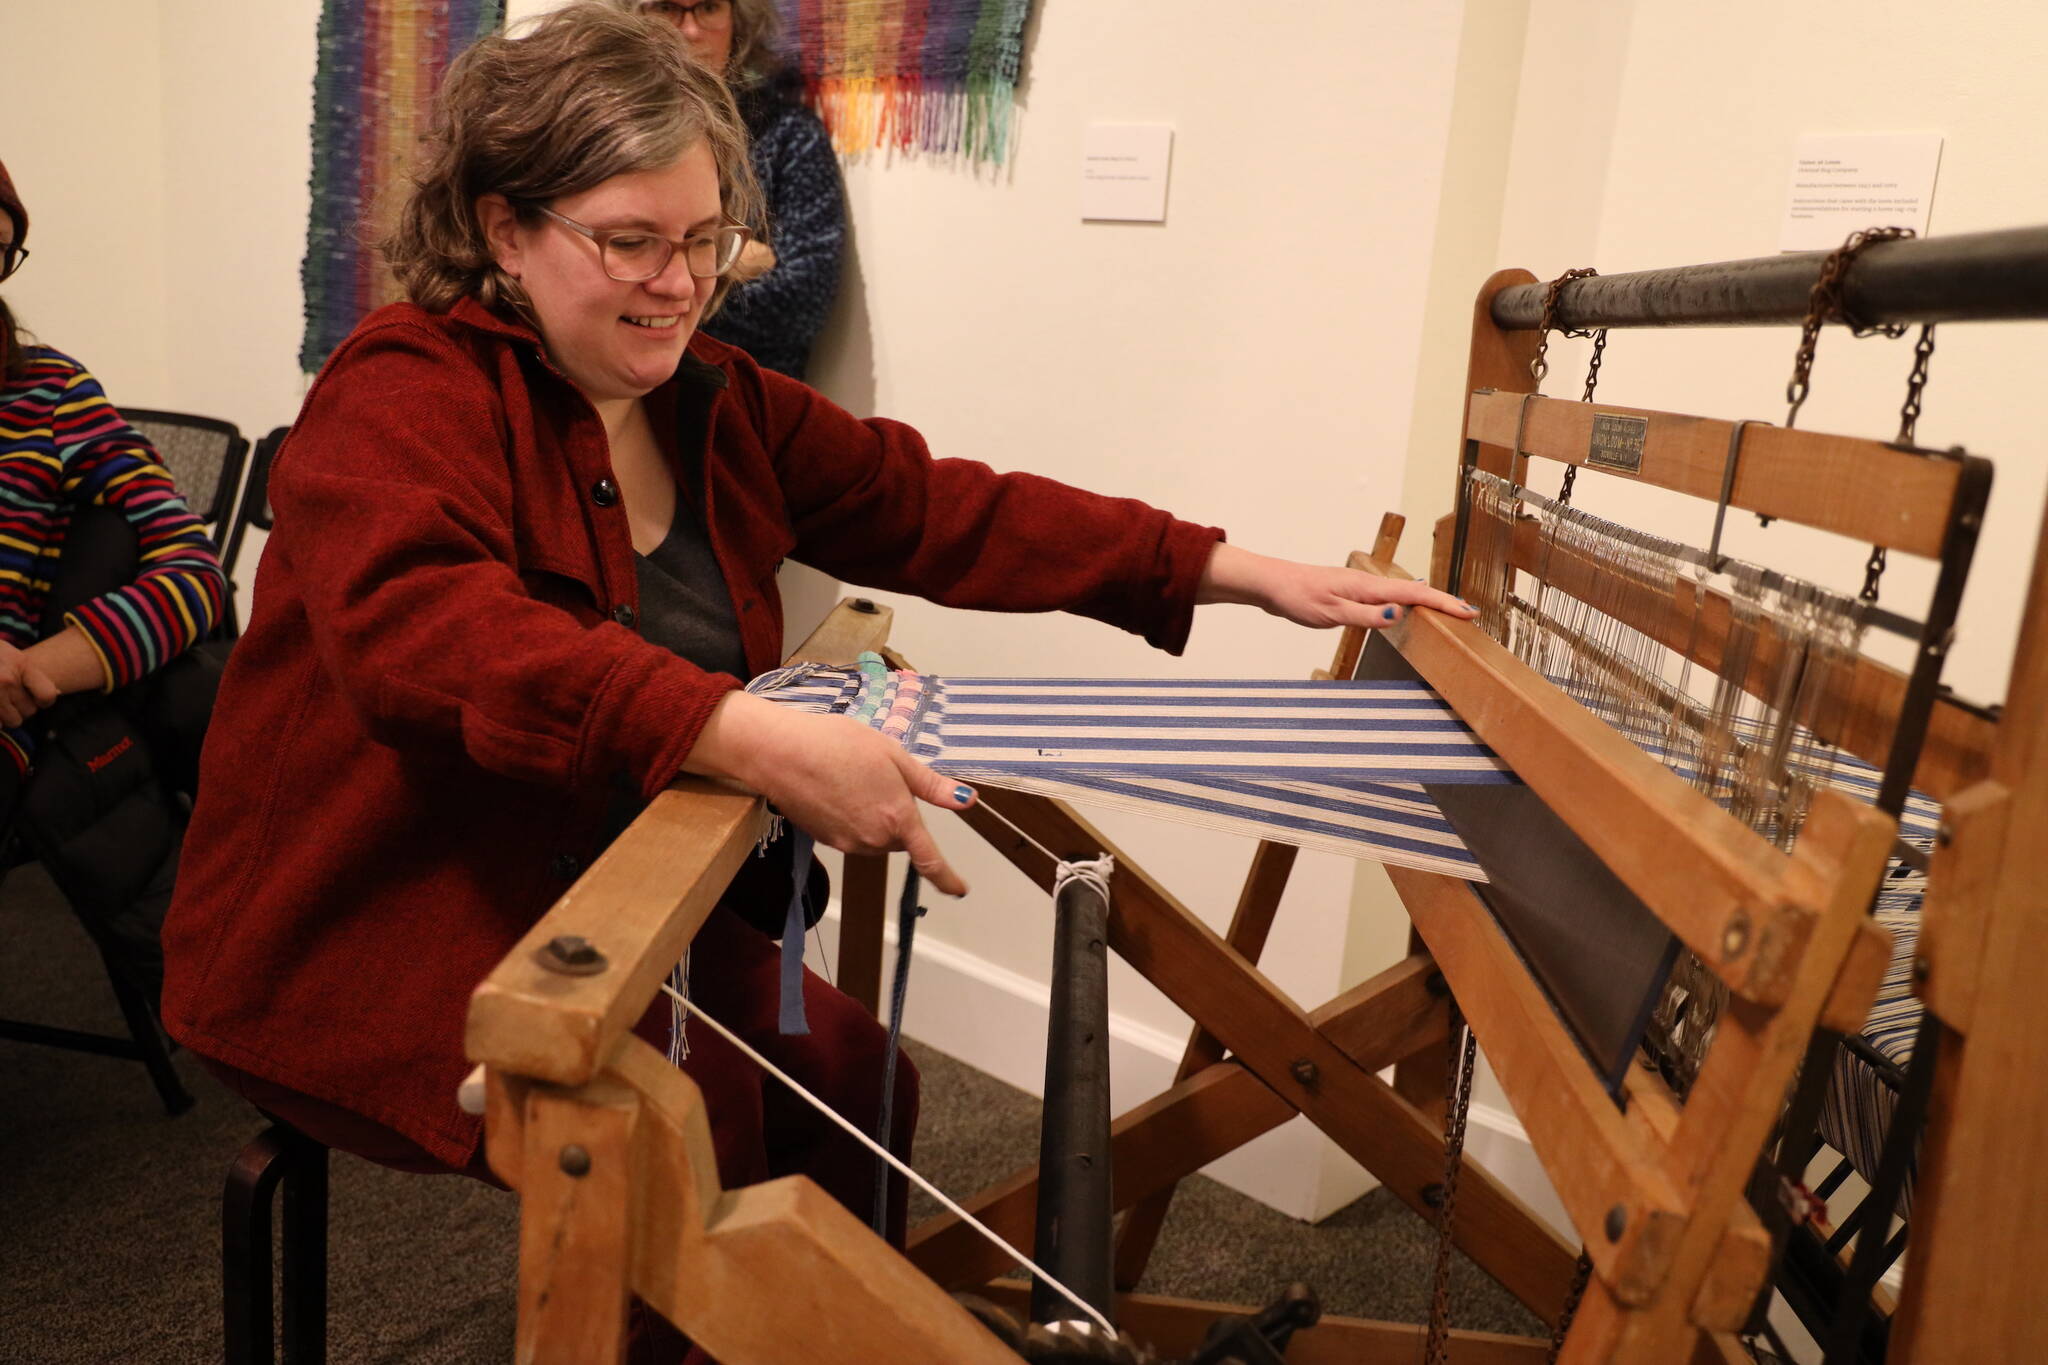 Mary McEwen gives a demonstration of her vintage loom during her Artist Talk Saturday morning about her exhibition, “Hit & Miss: Adventures in Textile Reuse,” at the Juneau-Douglas City Museum. (Clarise Larson / Juneau Empire)
Mary McEwen gives a demonstration of her vintage loom during her Artist Talk Saturday morning about her exhibition, “Hit & Miss: Adventures in Textile Reuse,” at the Juneau-Douglas City Museum. (Clarise Larson / Juneau Empire)